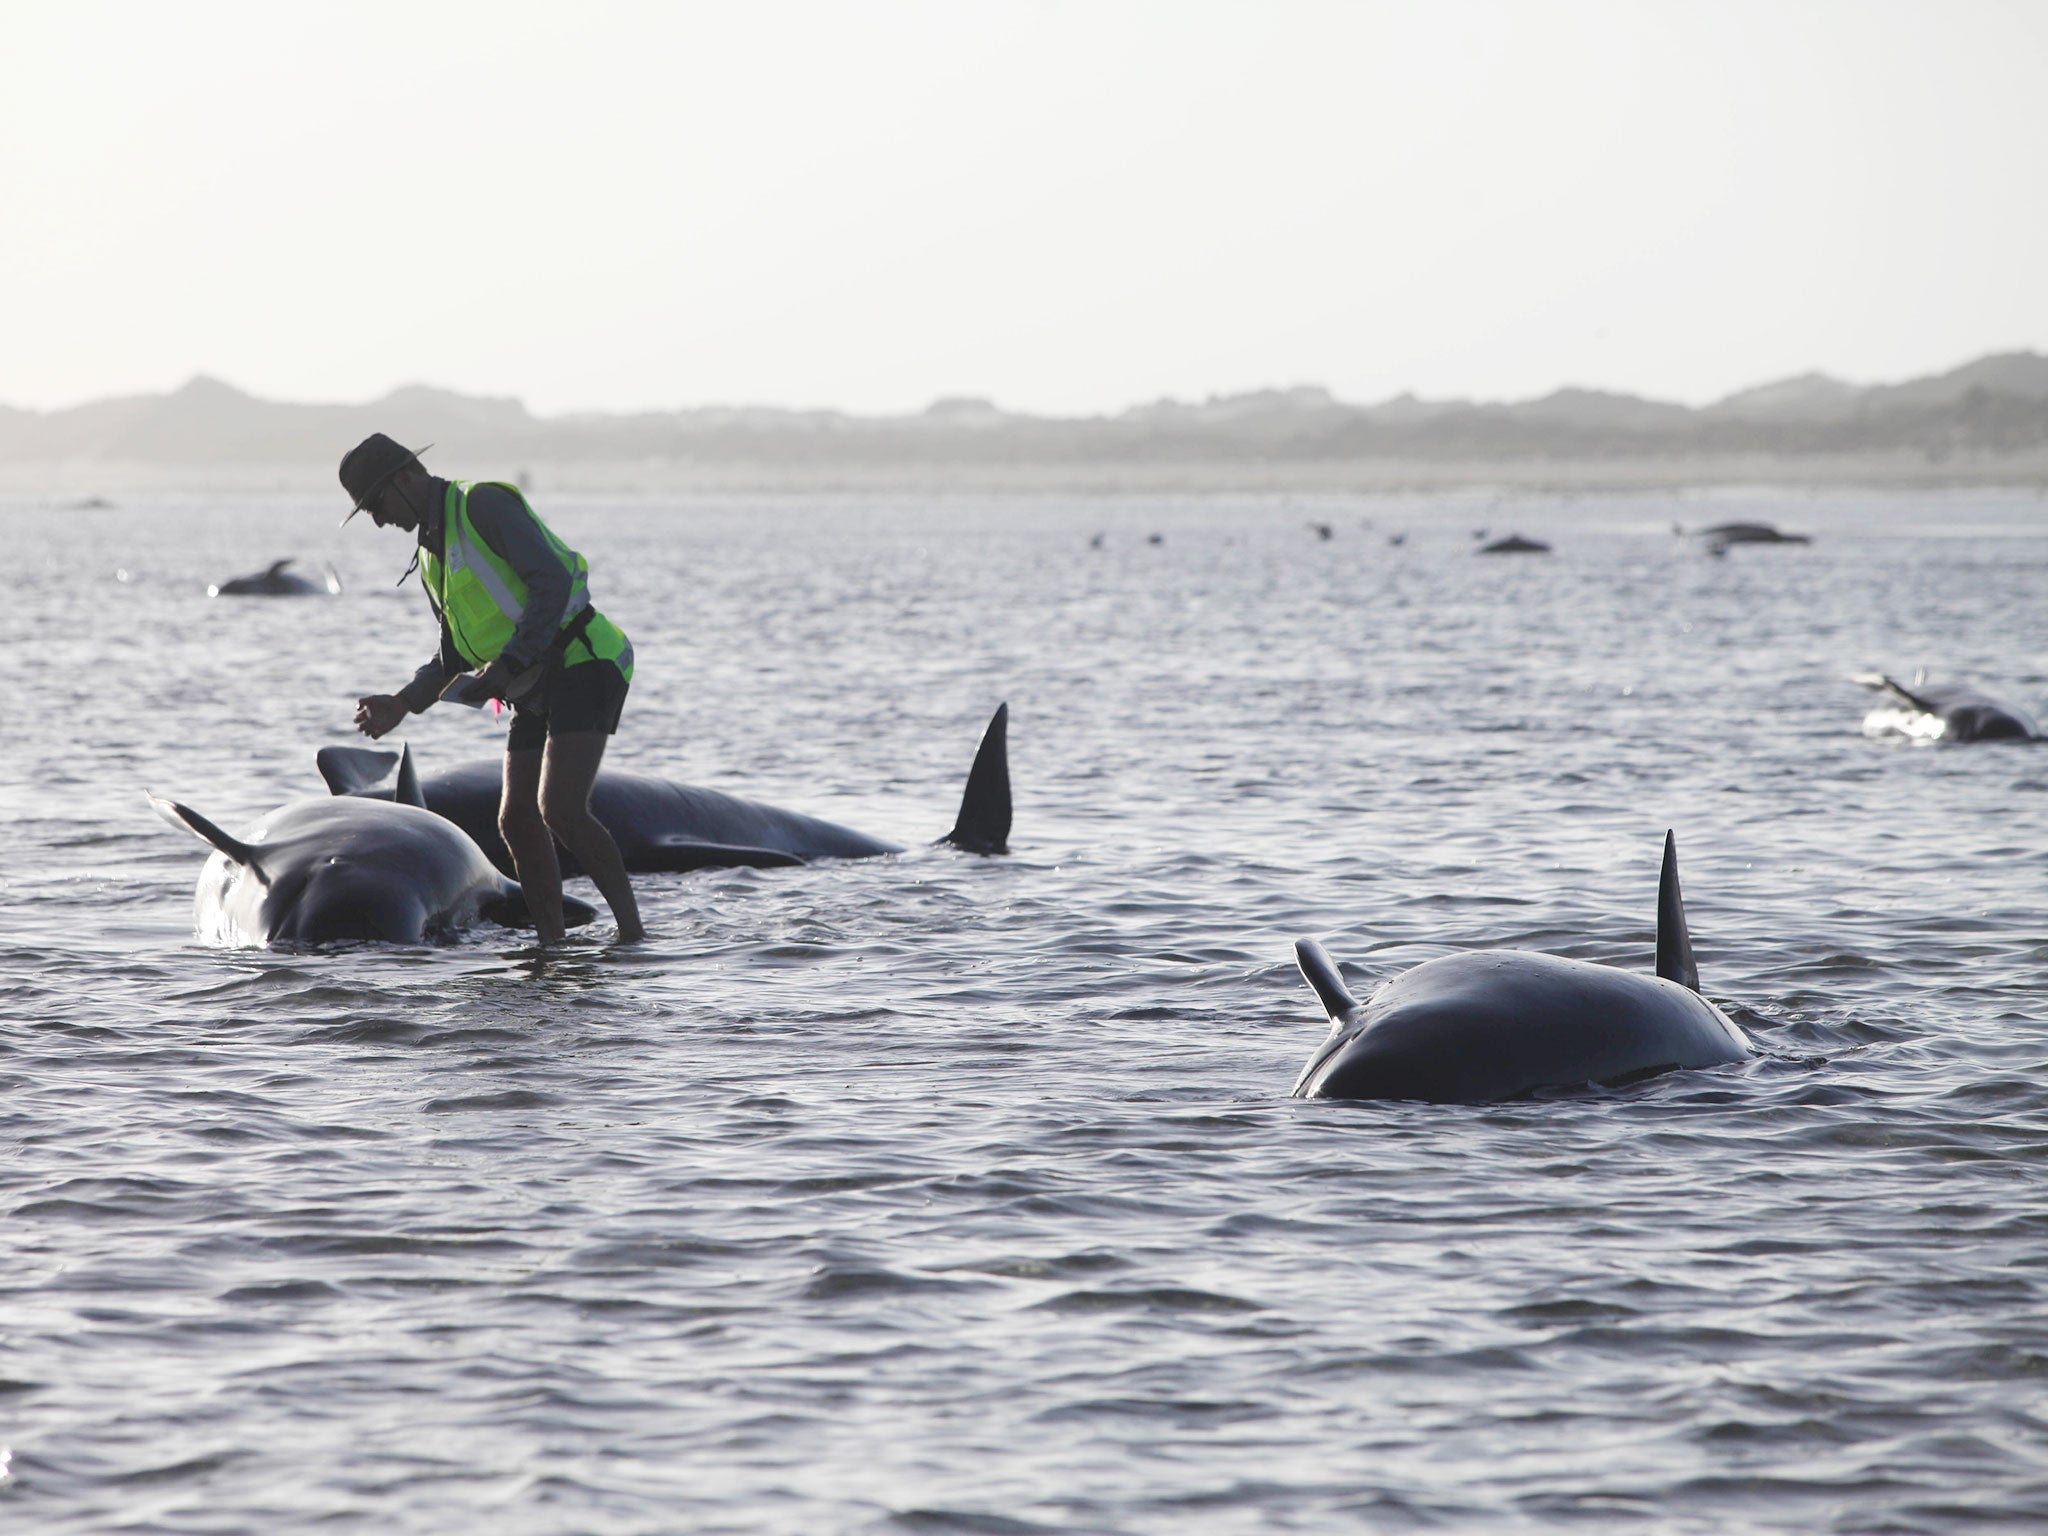 A Department of Conservation worker tends to a whale stranded on Farewell Spit, a famous spot for whale beachings, in Golden Bay on New Zealand's South Island. Nearly 200 pilot whales stranded themselves on New Zealand's South Island, with hordes of rescu